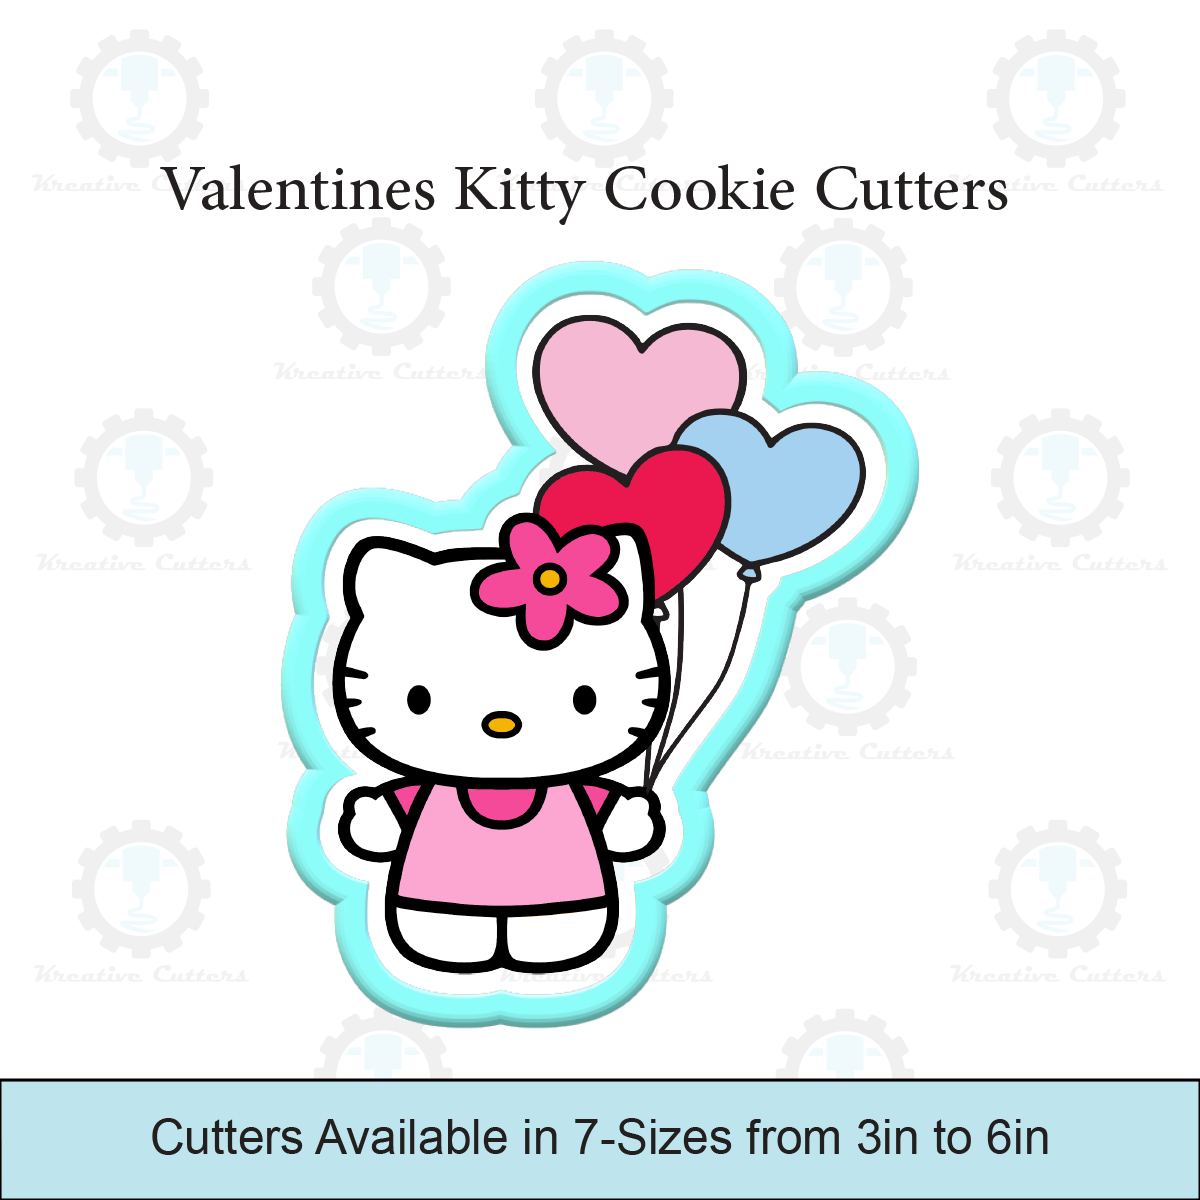 Valentines Kitty Cookie Cutters